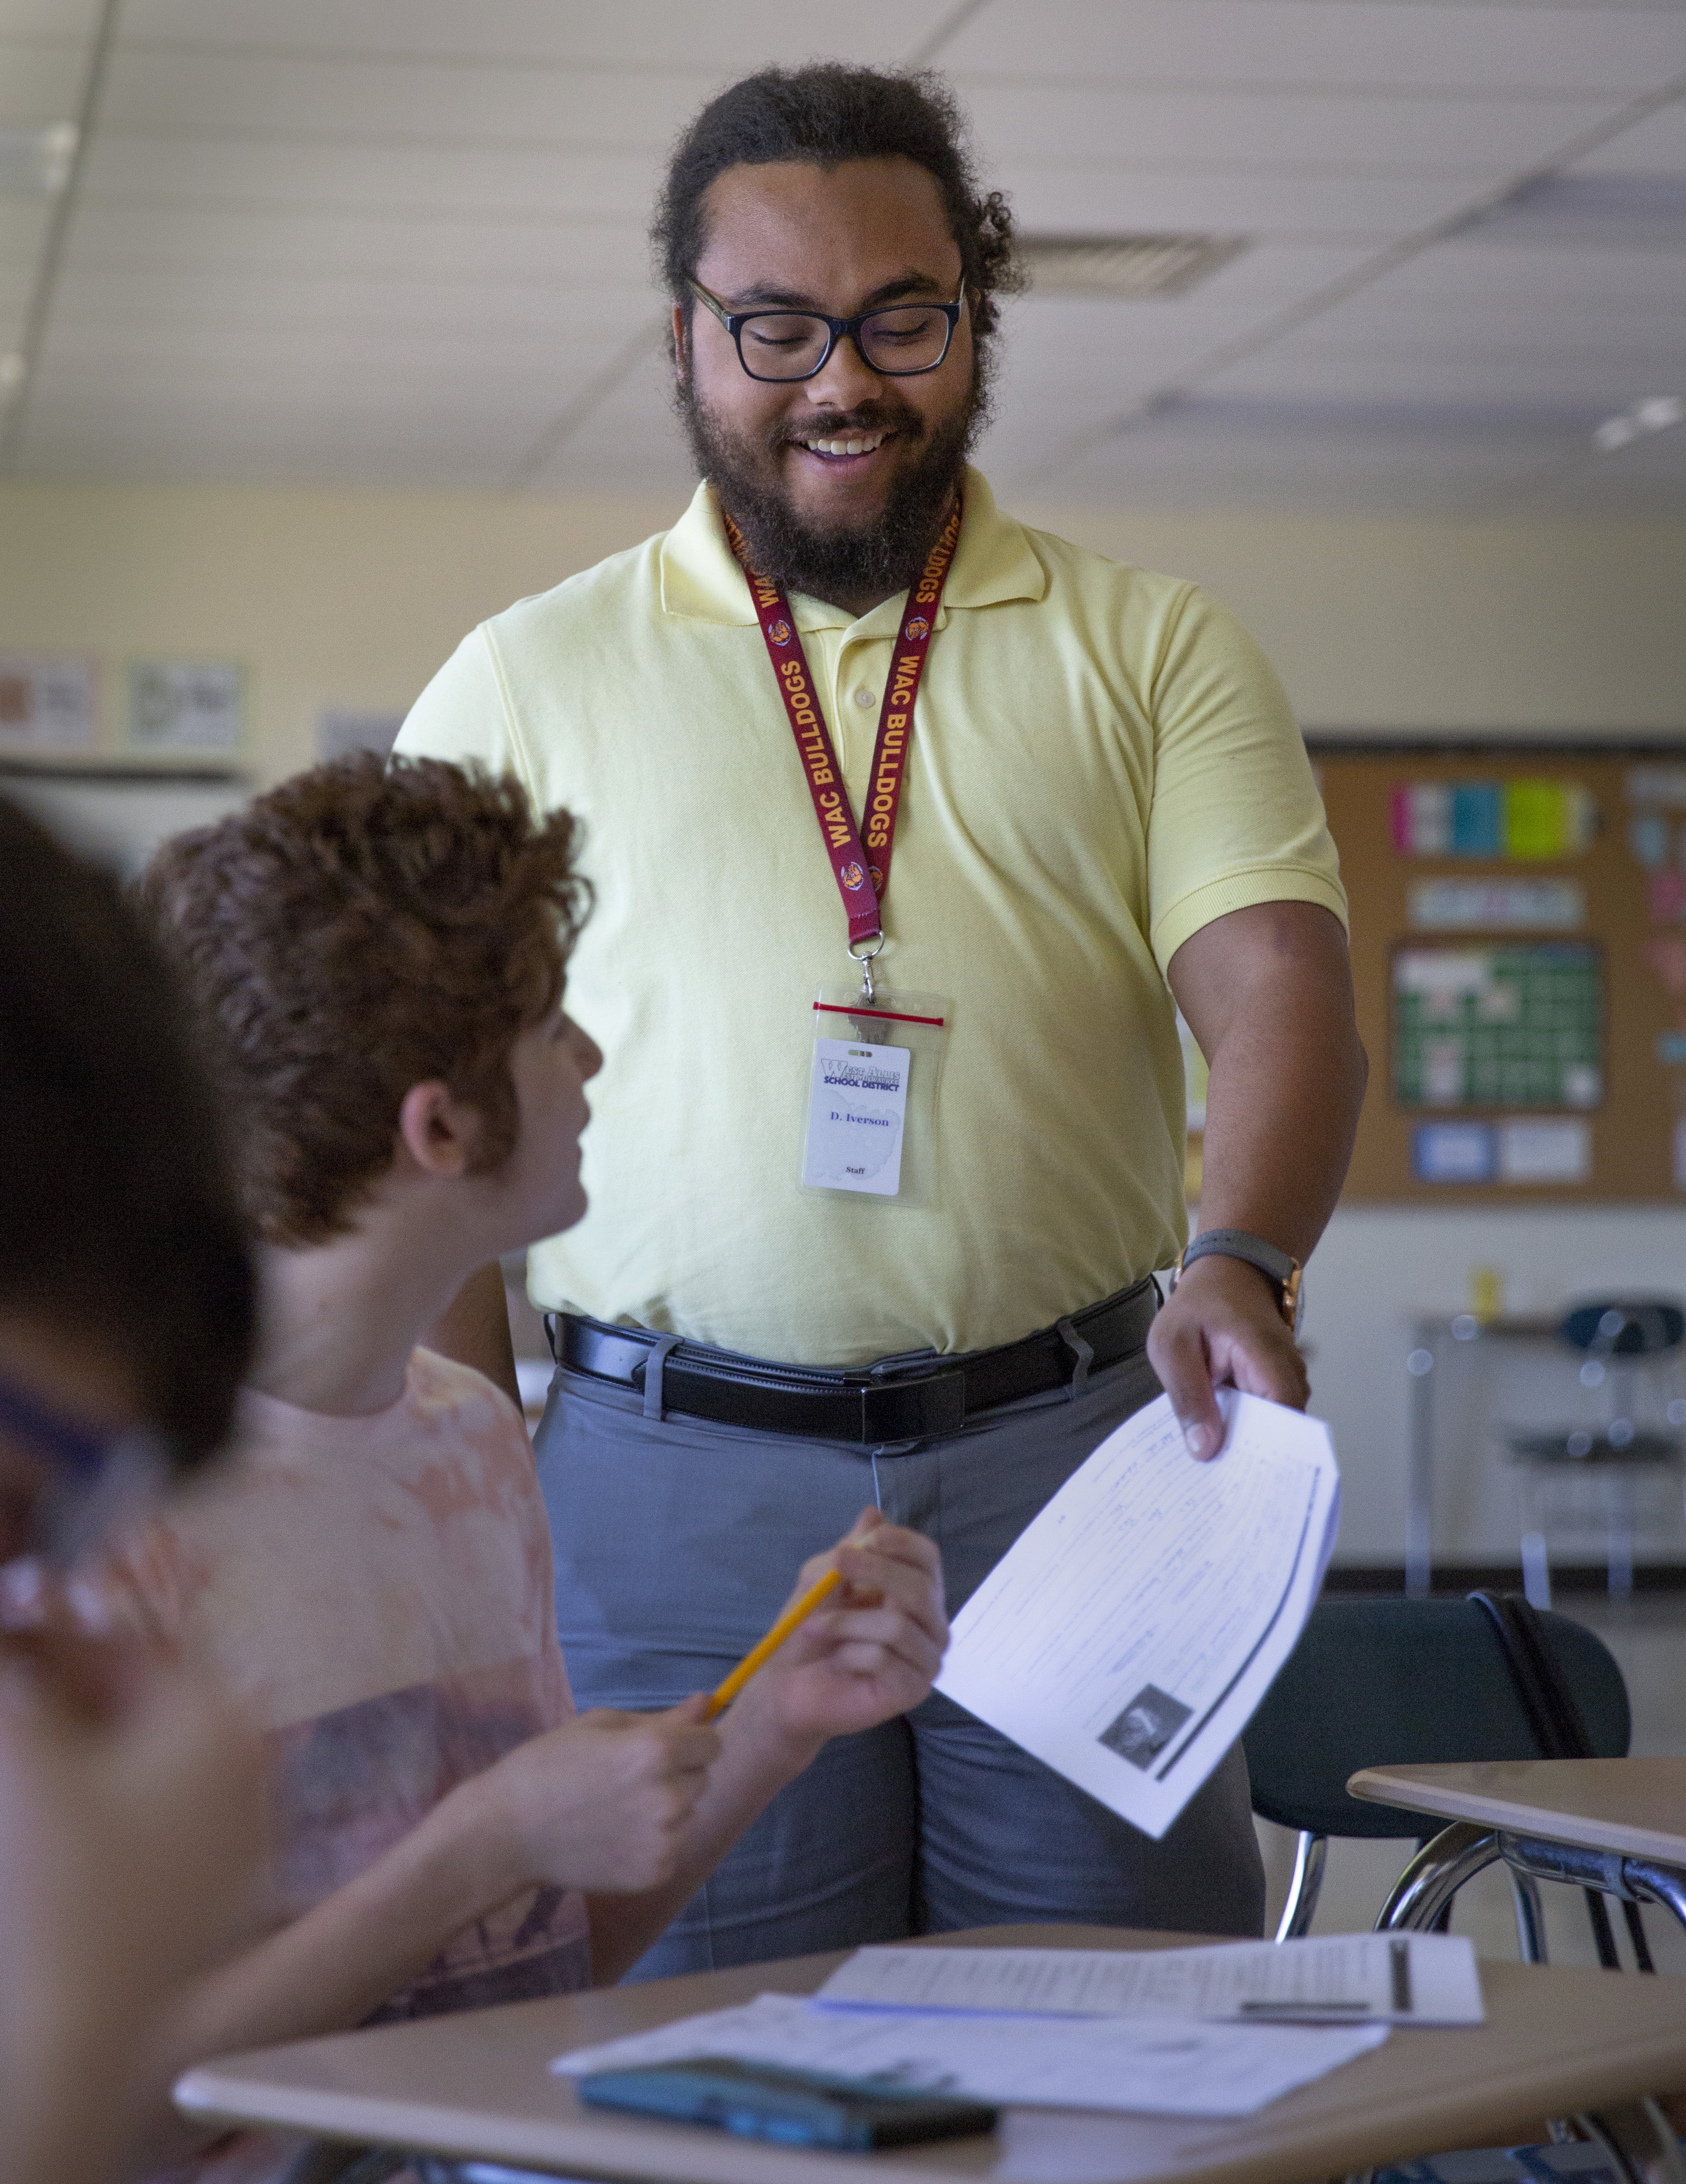 Deonte Iverson is finishing his student teaching requirement at West Allis High School, on May 23, 2019.